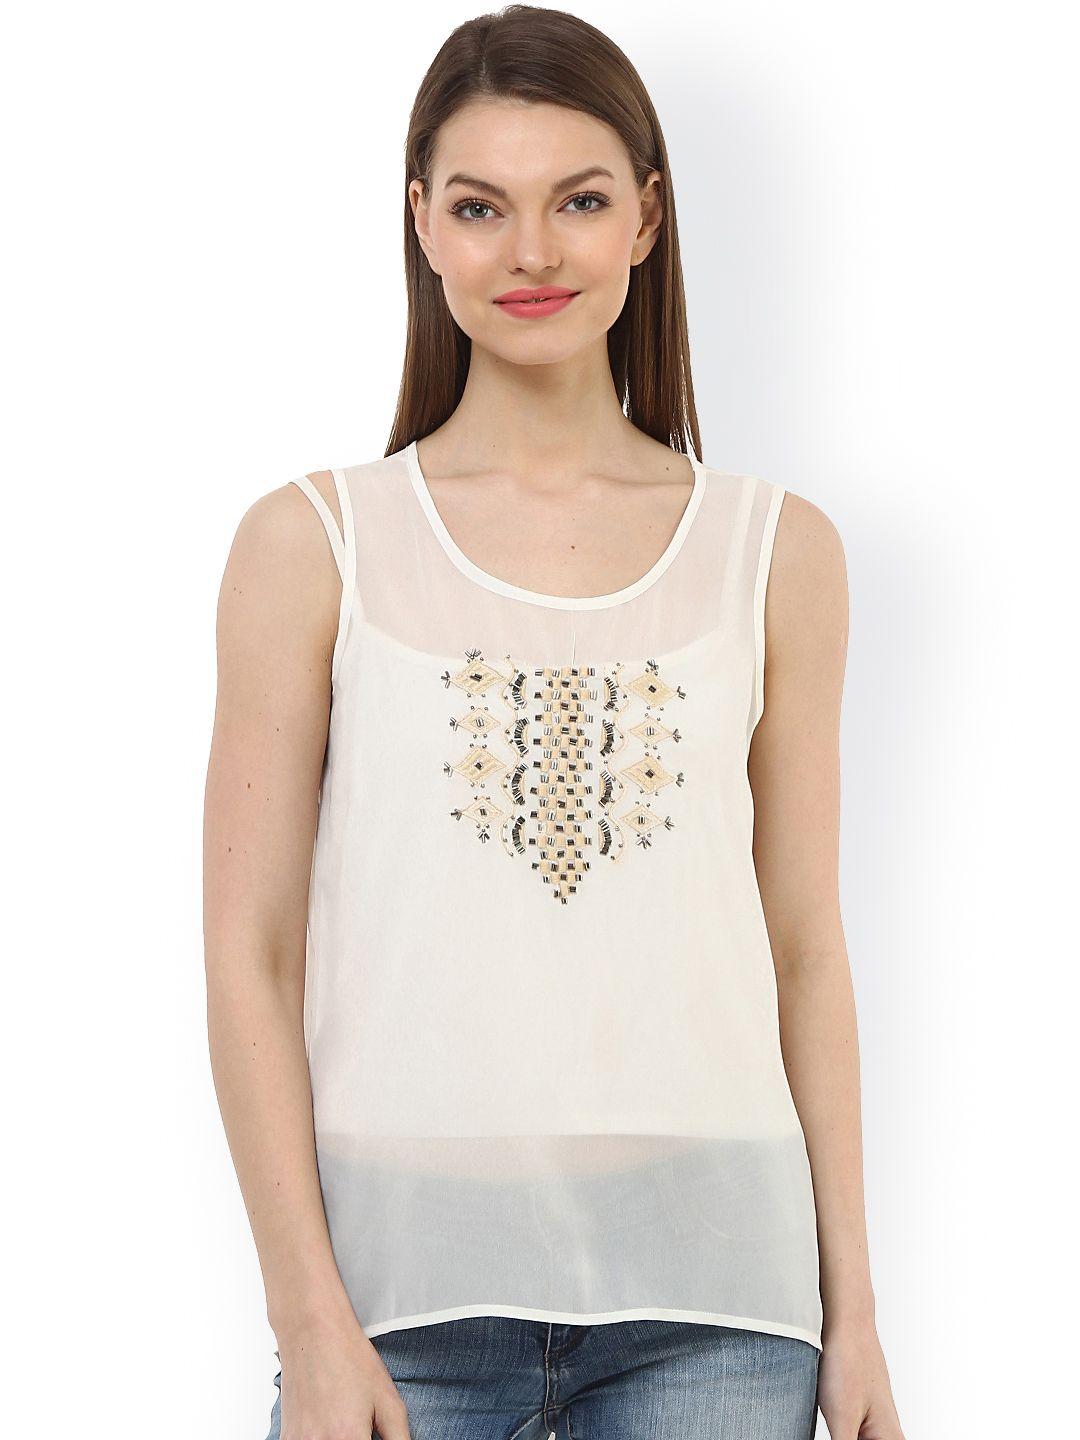 oxolloxo-off-white-embellished-sheer-top